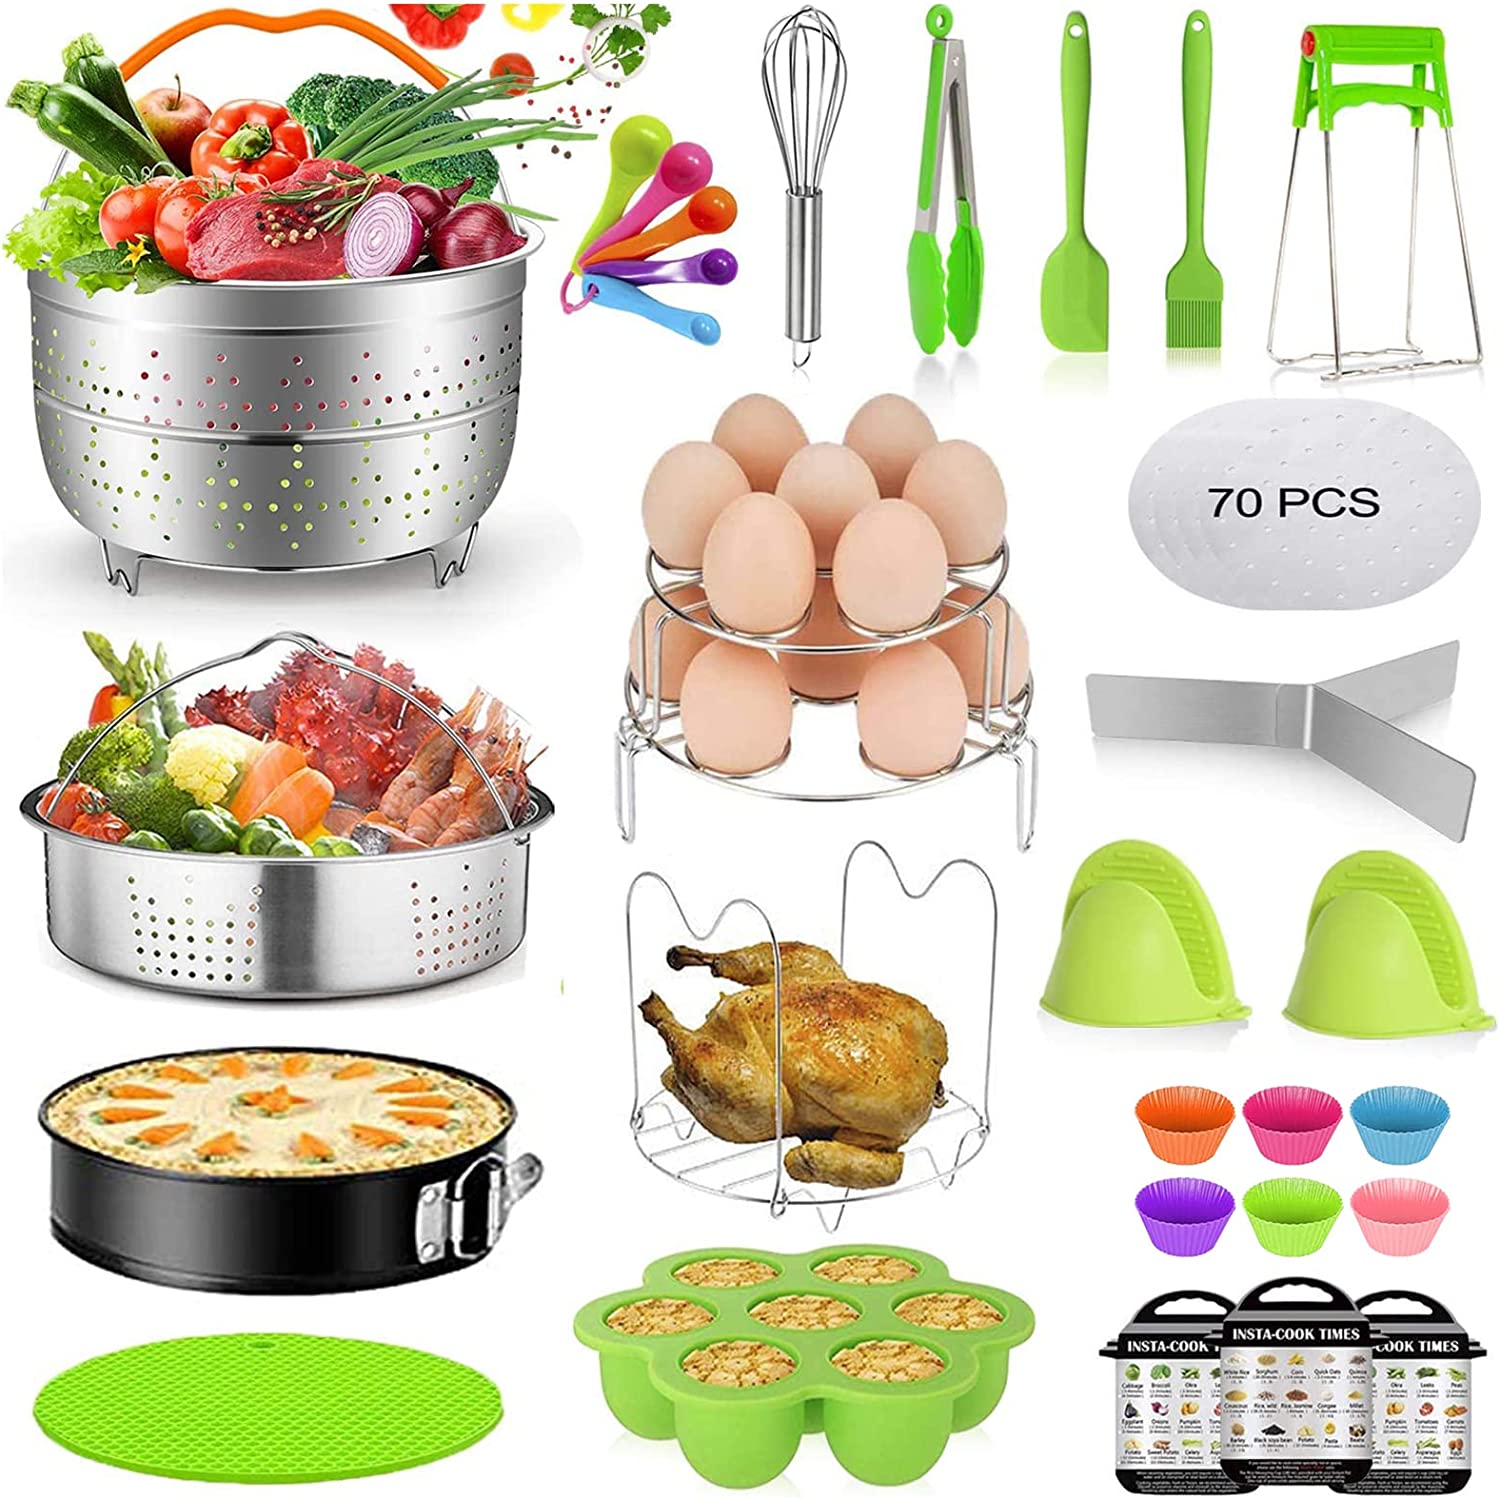 https://www.dontwasteyourmoney.com/wp-content/uploads/2023/01/mibote-assorted-tools-molds-instant-pot-accessories-98-piece-instant-pot-accessories.jpg